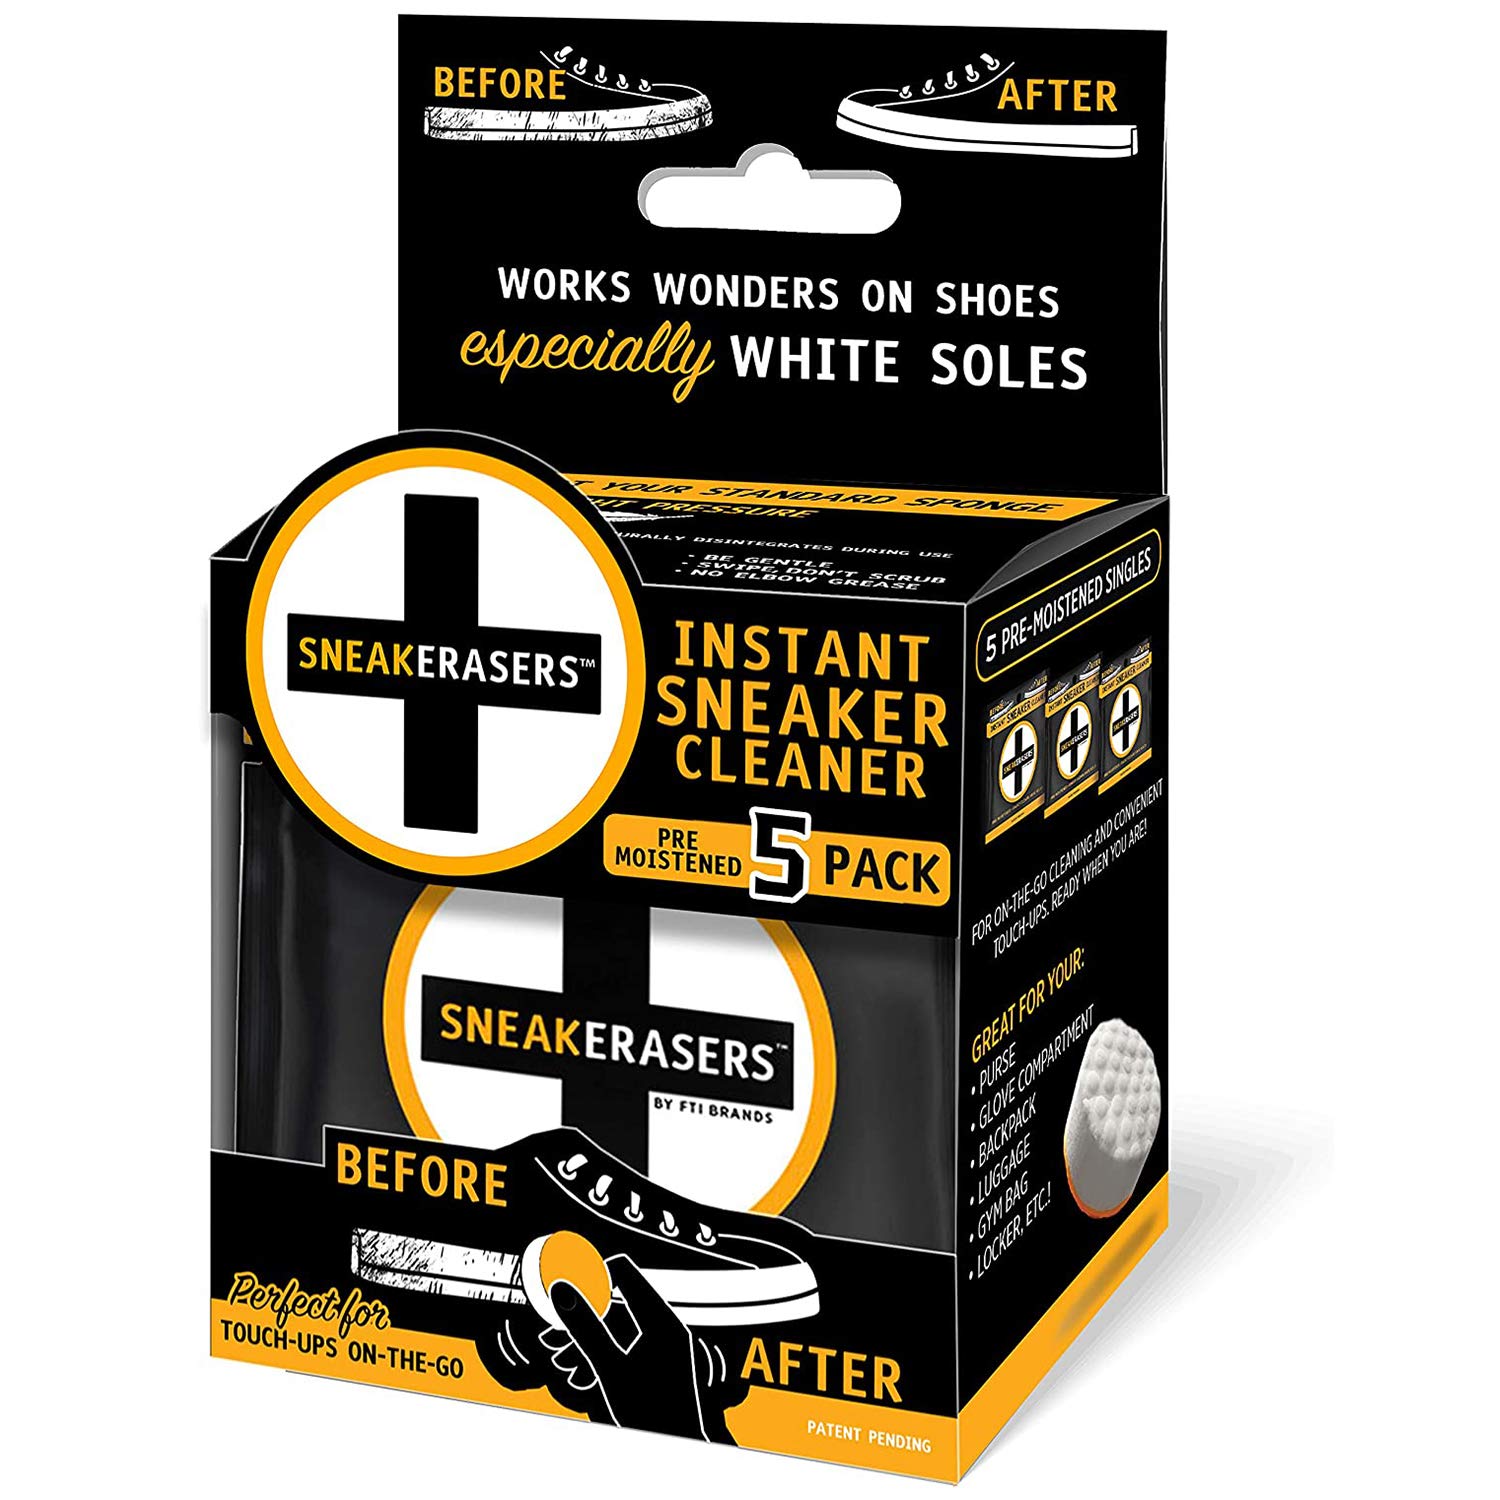 SneakERASERS clean shoes quick! 👟🧽💨 #SneakERASERS from #sharktank #, sneaker erasers